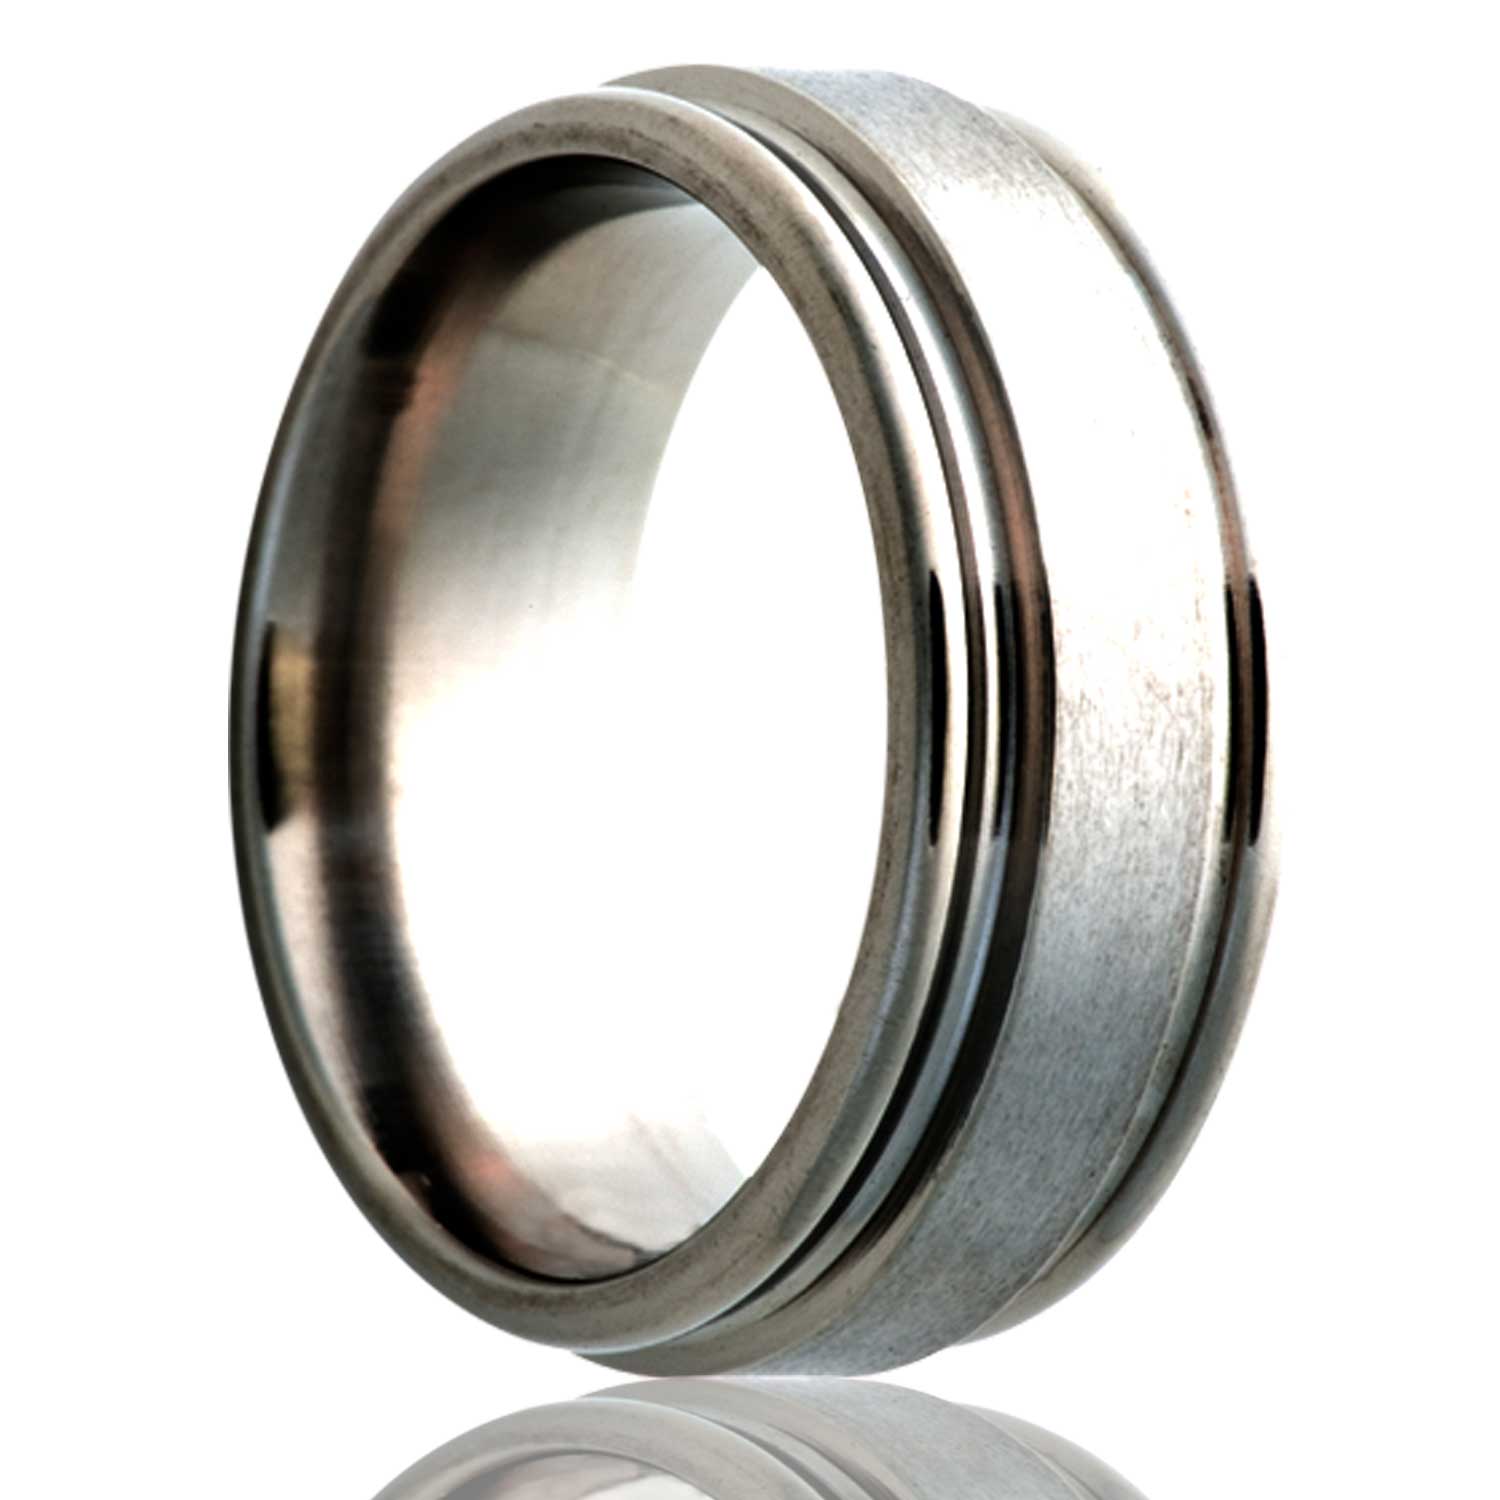 A satin finish titanium wedding band with grooved edges displayed on a neutral white background.